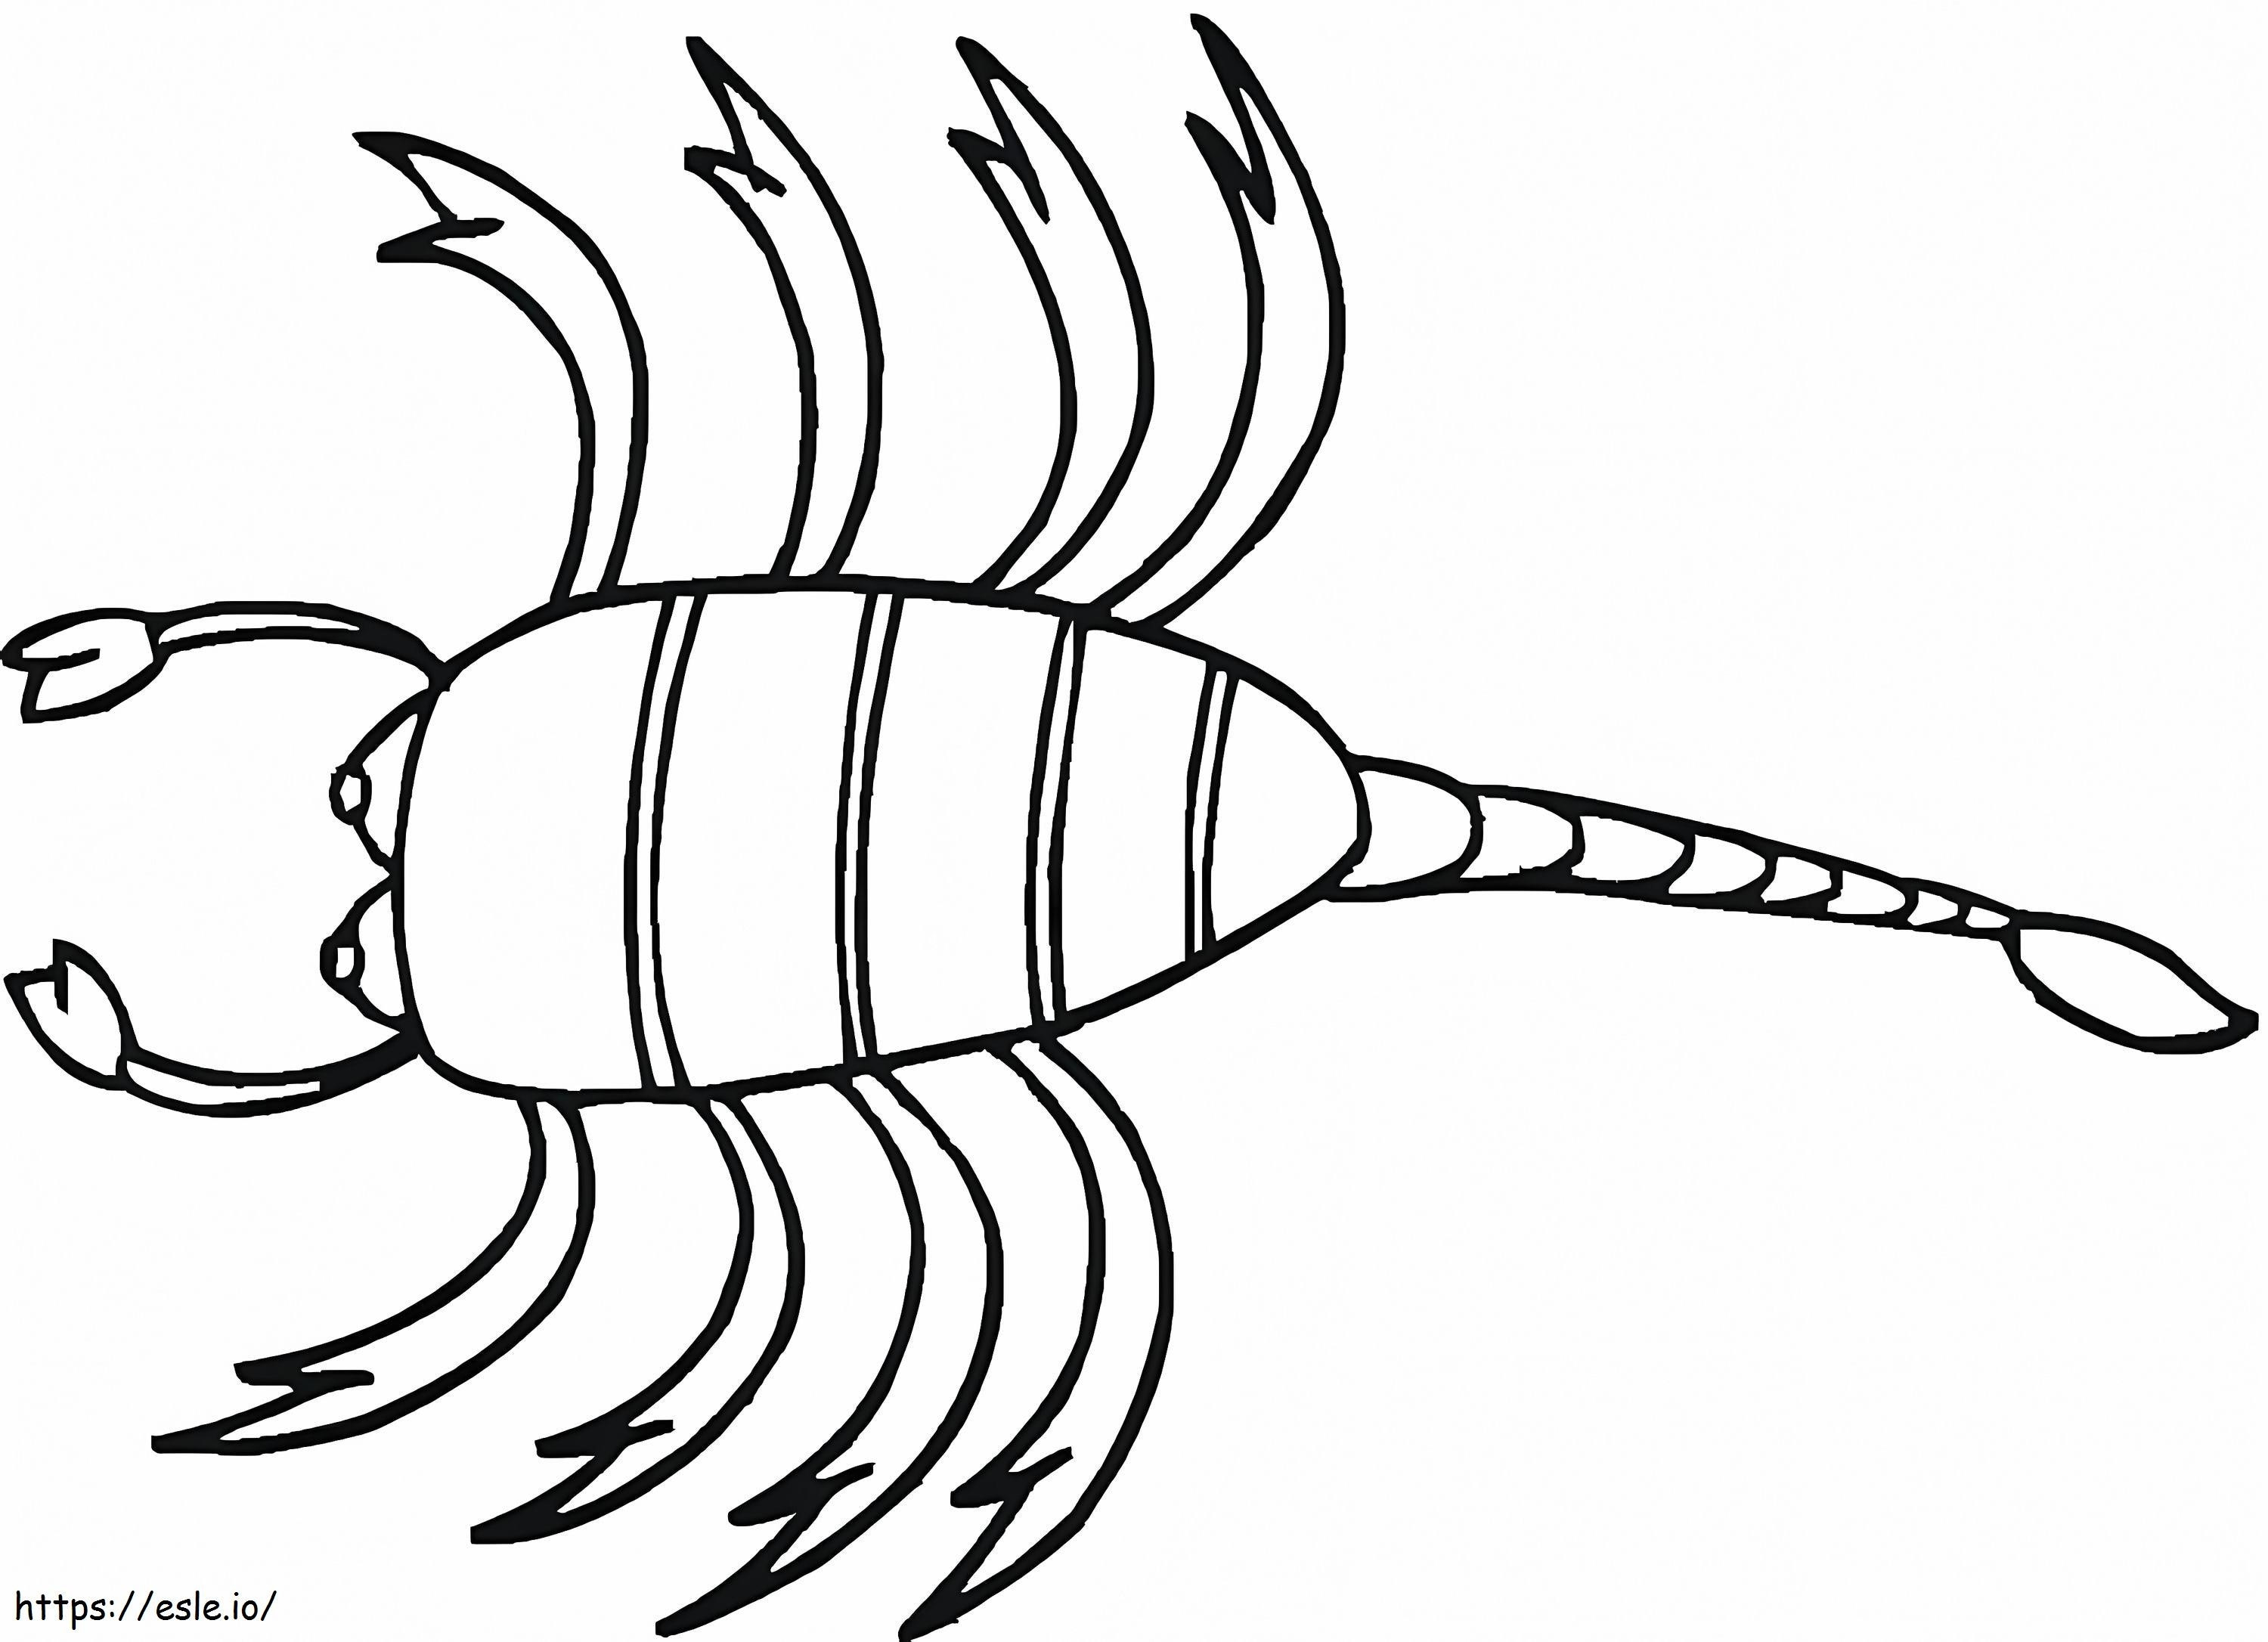 Scorpion 8 coloring page